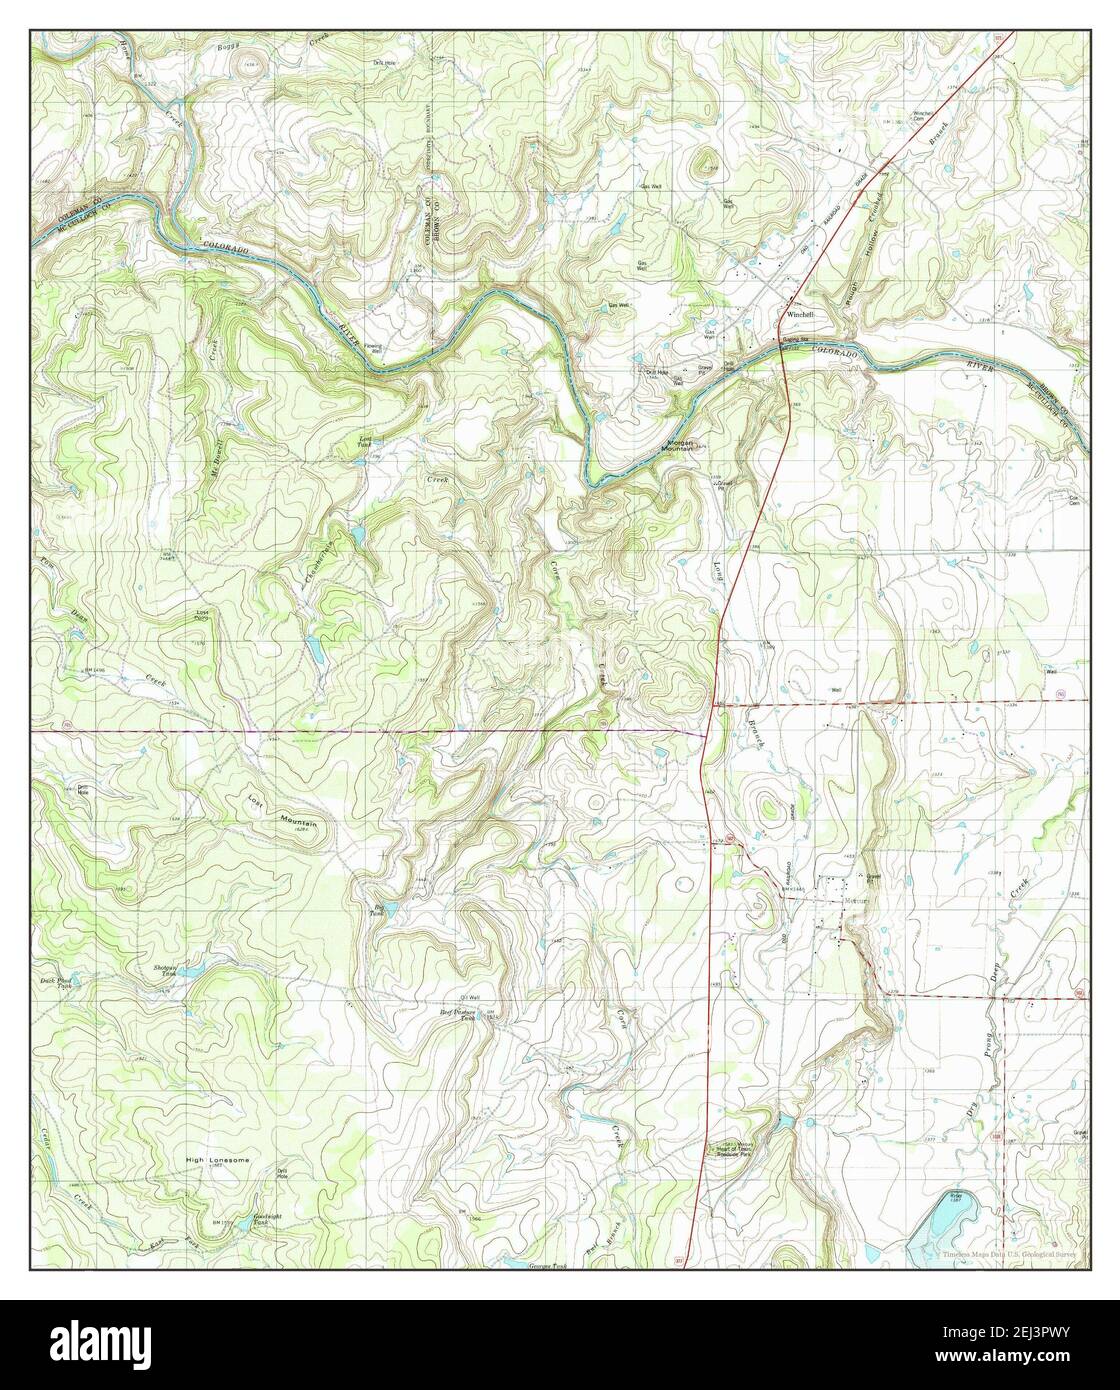 Mercury, Texas, map 1979, 1:24000, United States of America by Timeless Maps, data U.S. Geological Survey Stock Photo